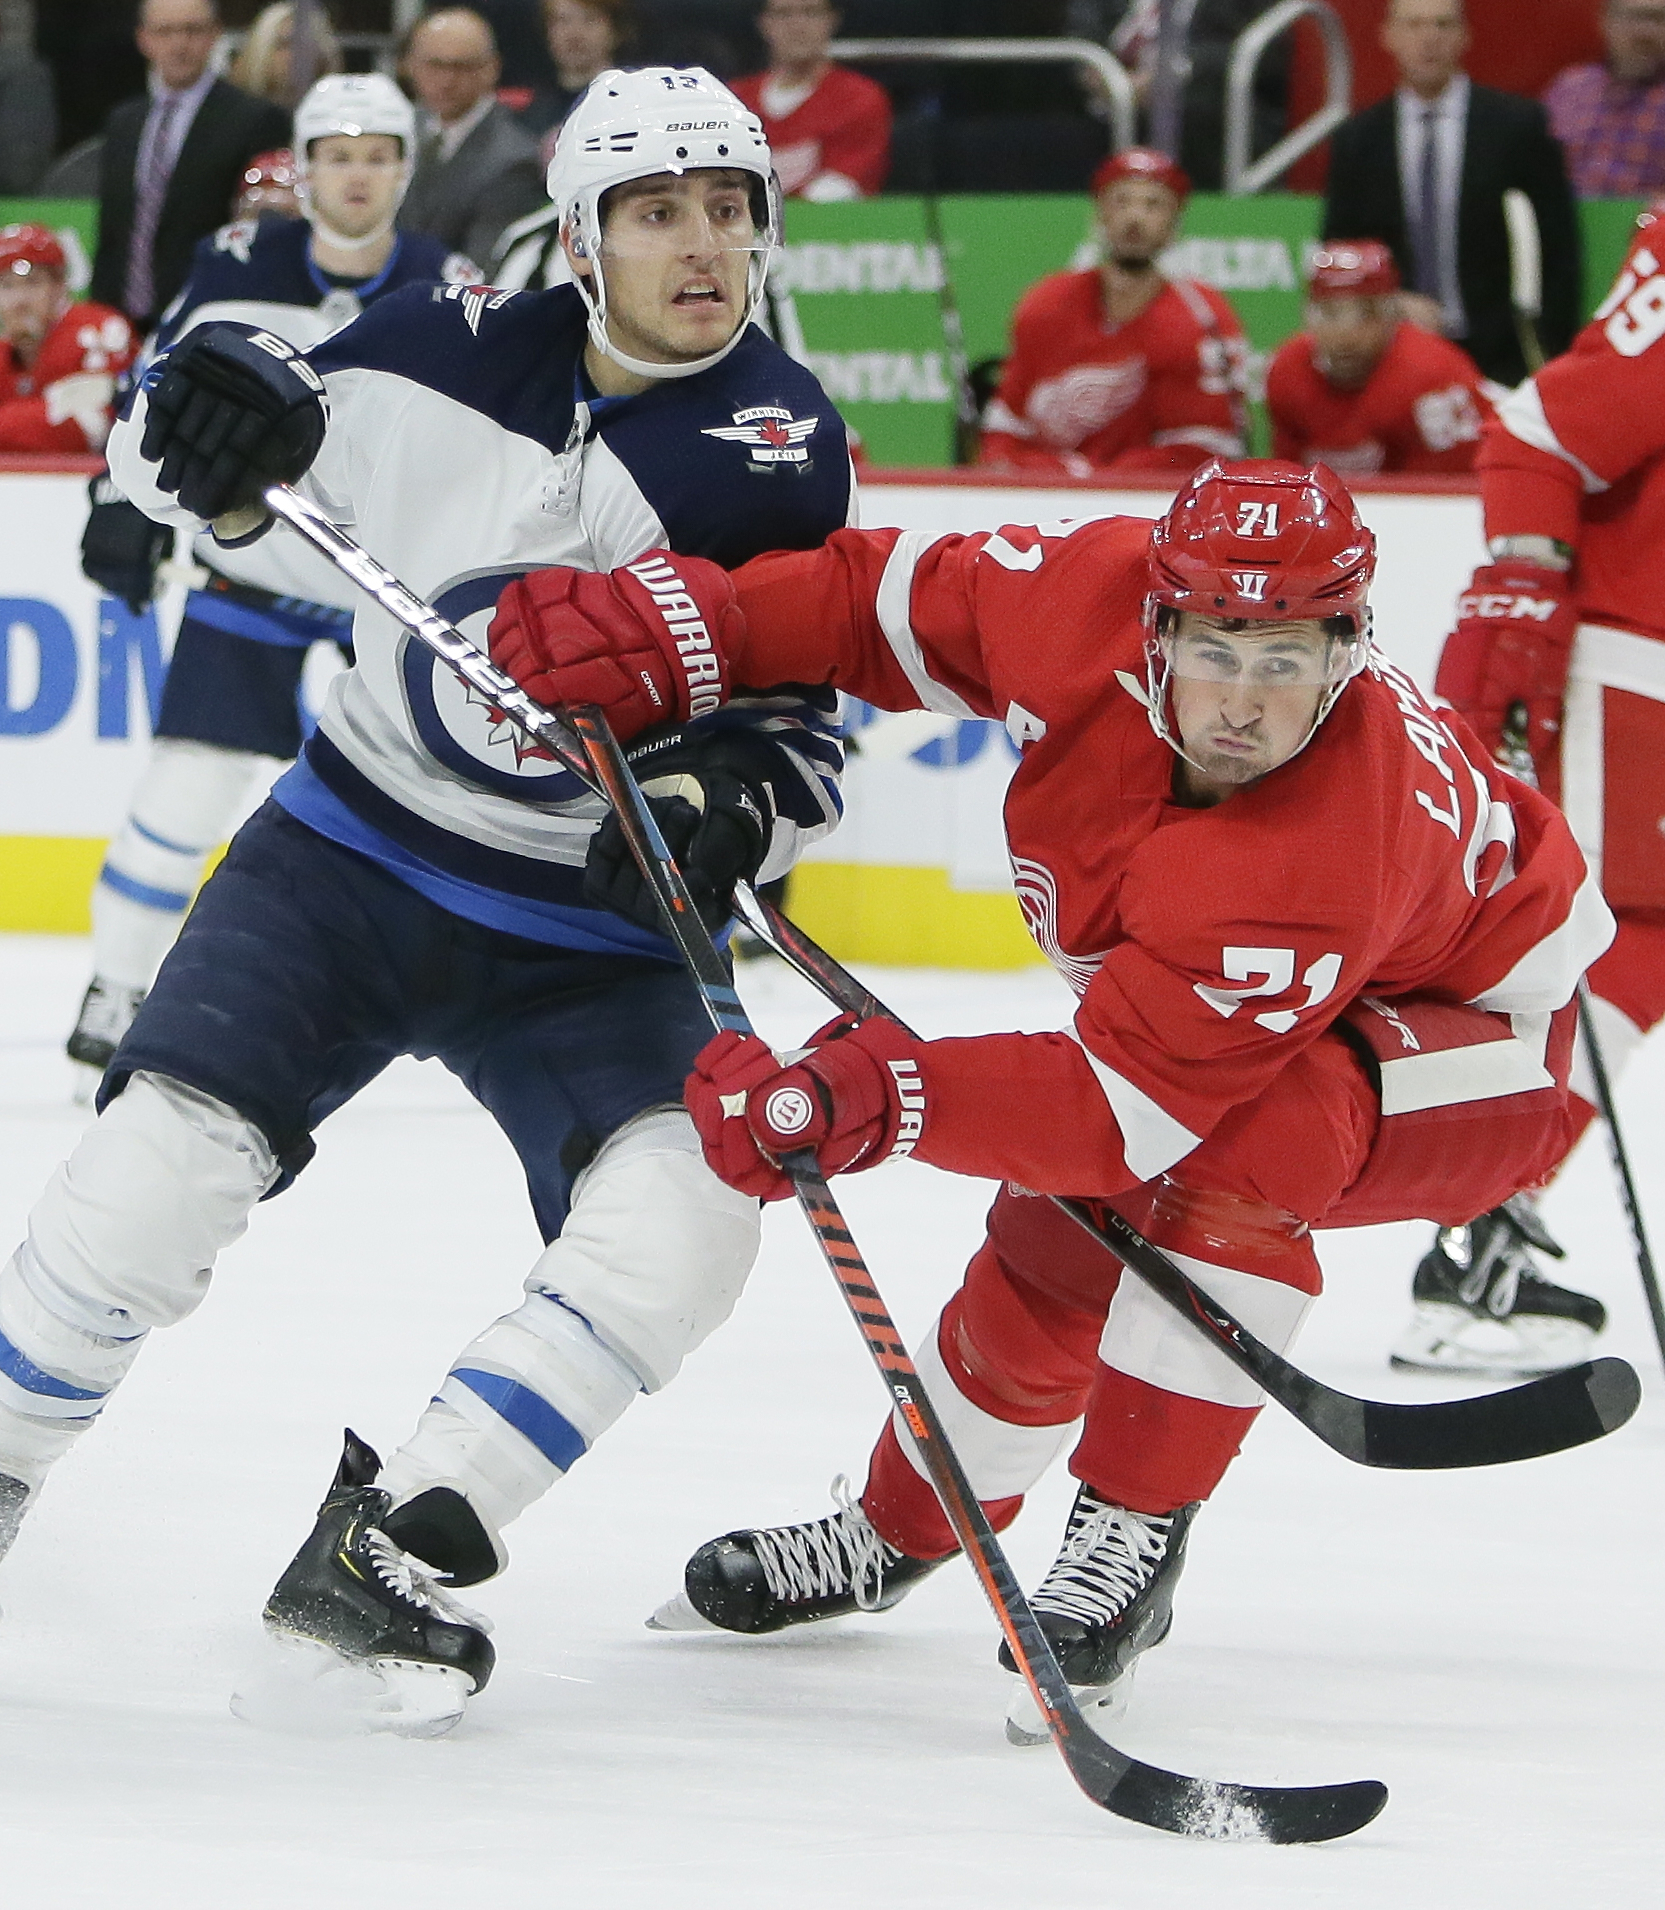 Byfuglien’s late goal gives Jets 2-1 win over Red Wings